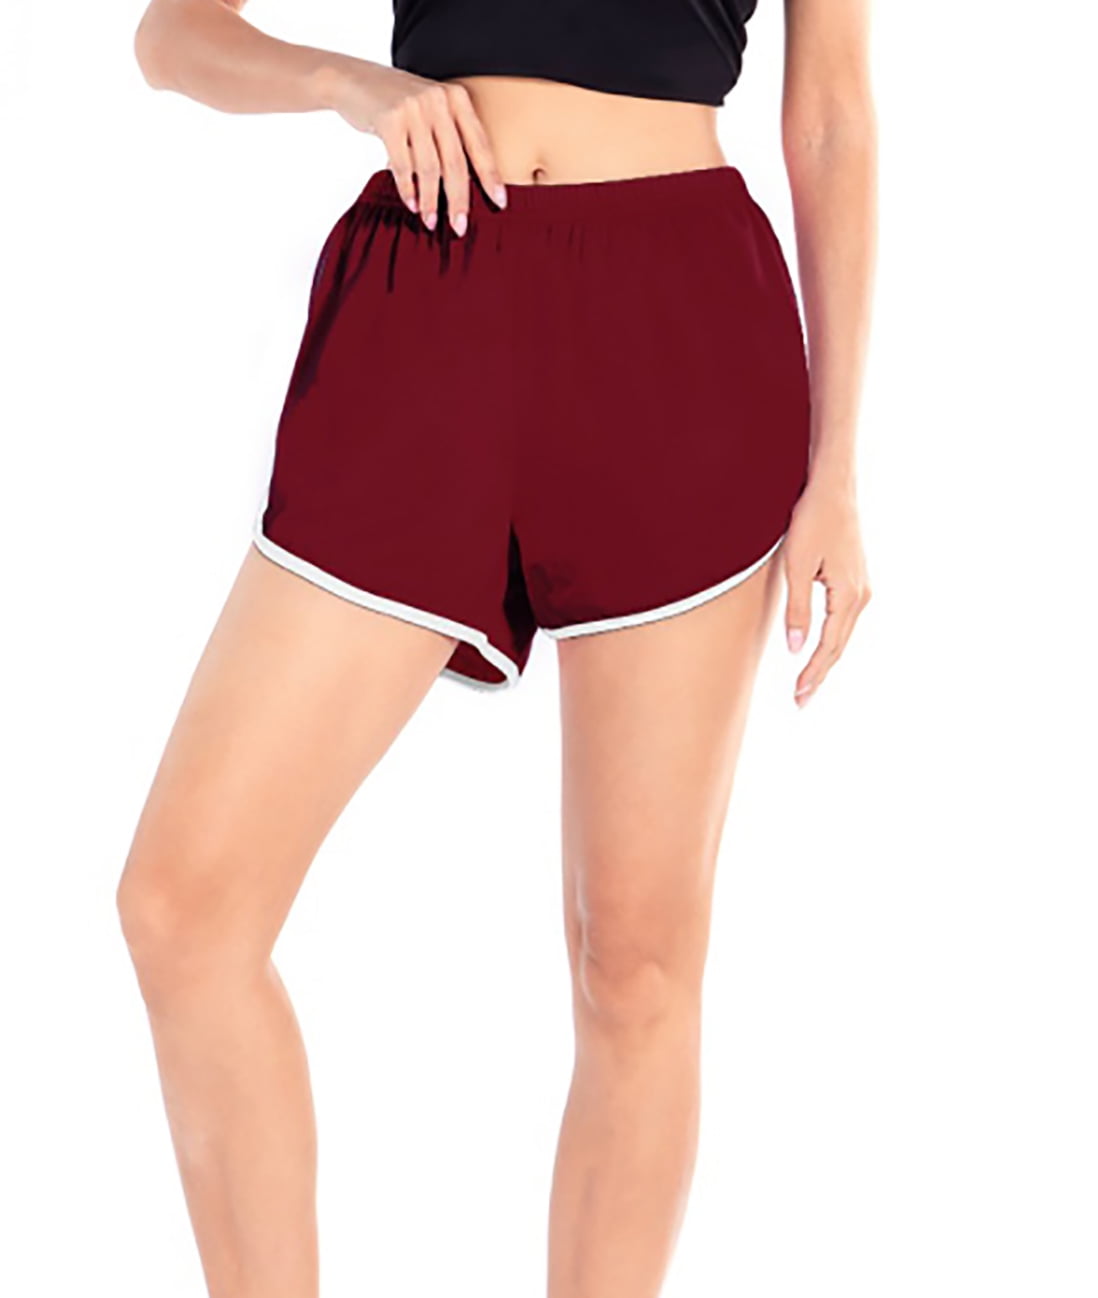 Best Workout Shorts for Women: 4 Fitness Pros Rate 14 Pairs of